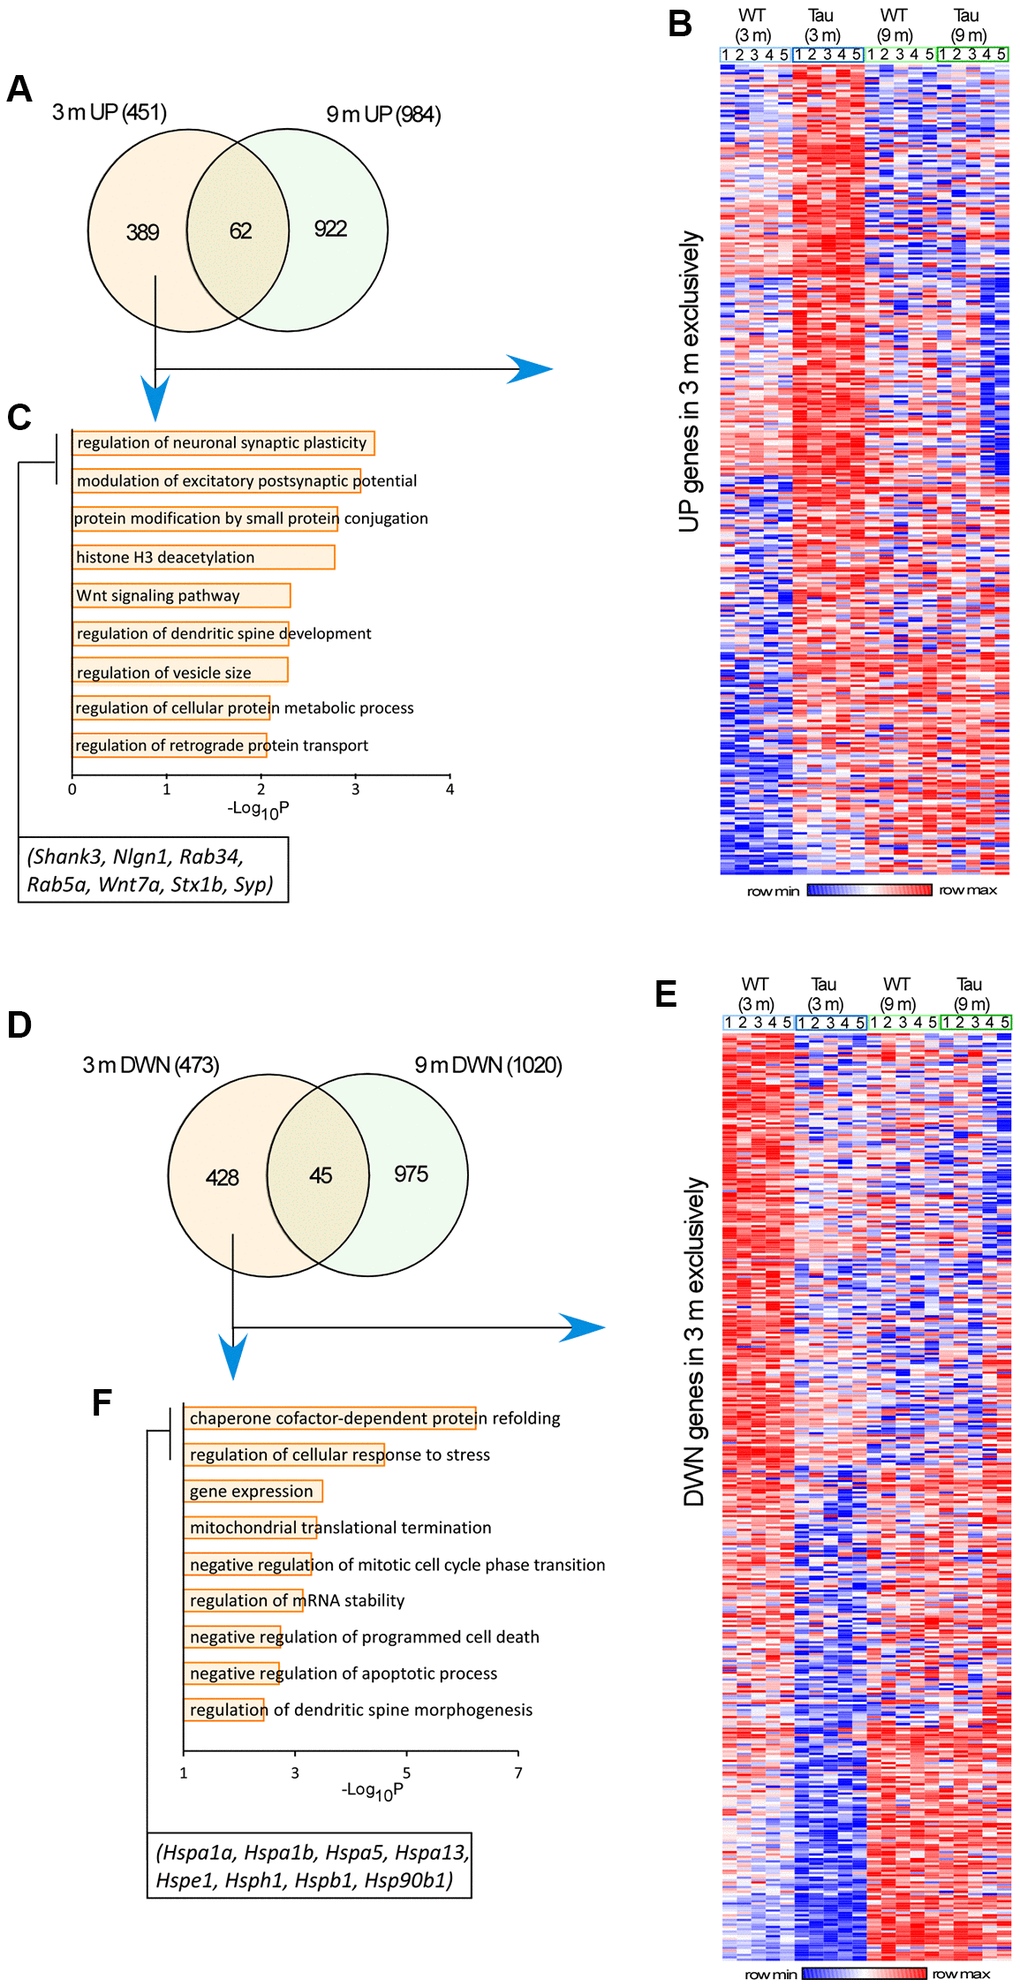 Transcriptomic analysis revealed genome-wide alterations in the hippocampus of P301S mice at different ages. (A, D) Venn-diagrams showing the significantly up-regulated (A) or down-regulated (D) genes in P301S mice at 3 months and 9 months. (B, E) Heatmaps representing expression (row z-score) of genes that were up-regulated (B) or down-regulated (E) in P301S mice exclusively at 3 months, compared to age-matched WT samples (n = 5 mice/group). (C, F) GO Biological Process analysis of up-regulated genes (C) or down-regulated genes (F) in P301S mice exclusively at 3 months.